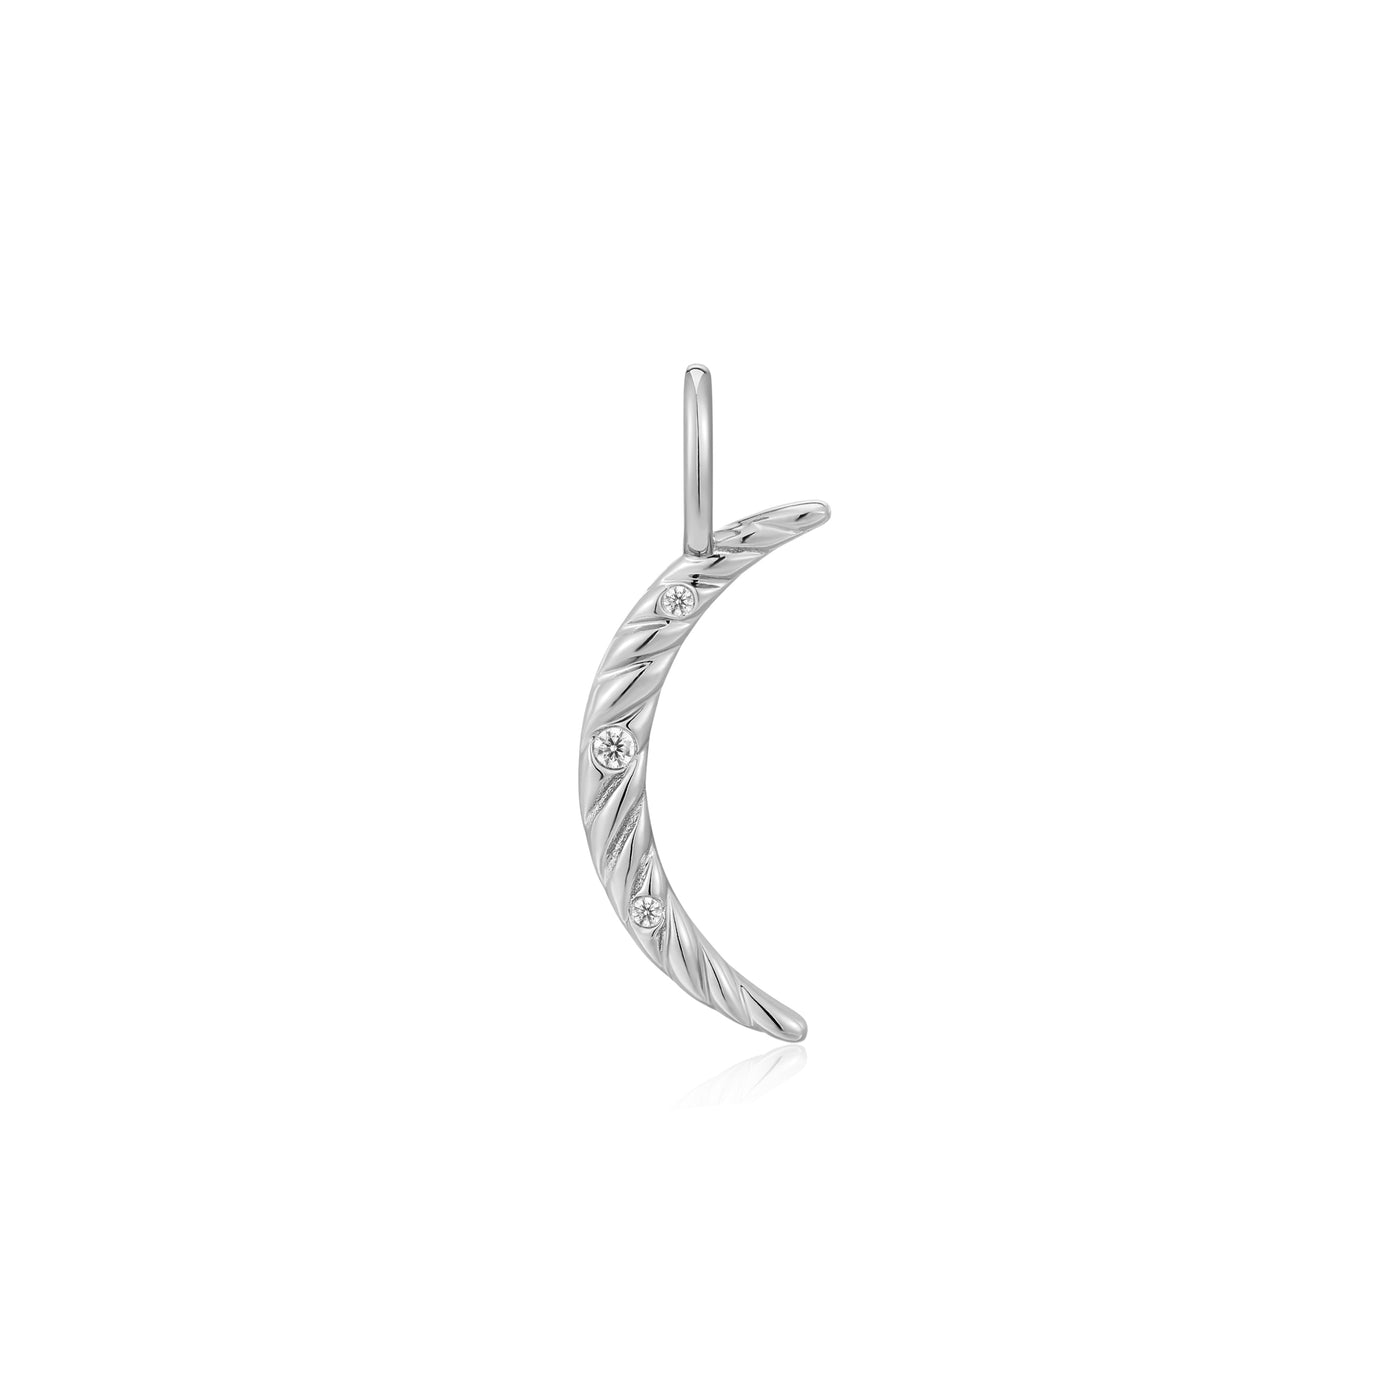 Ania Haie Sterling Silver Moon Sliver Charm NC048-10H